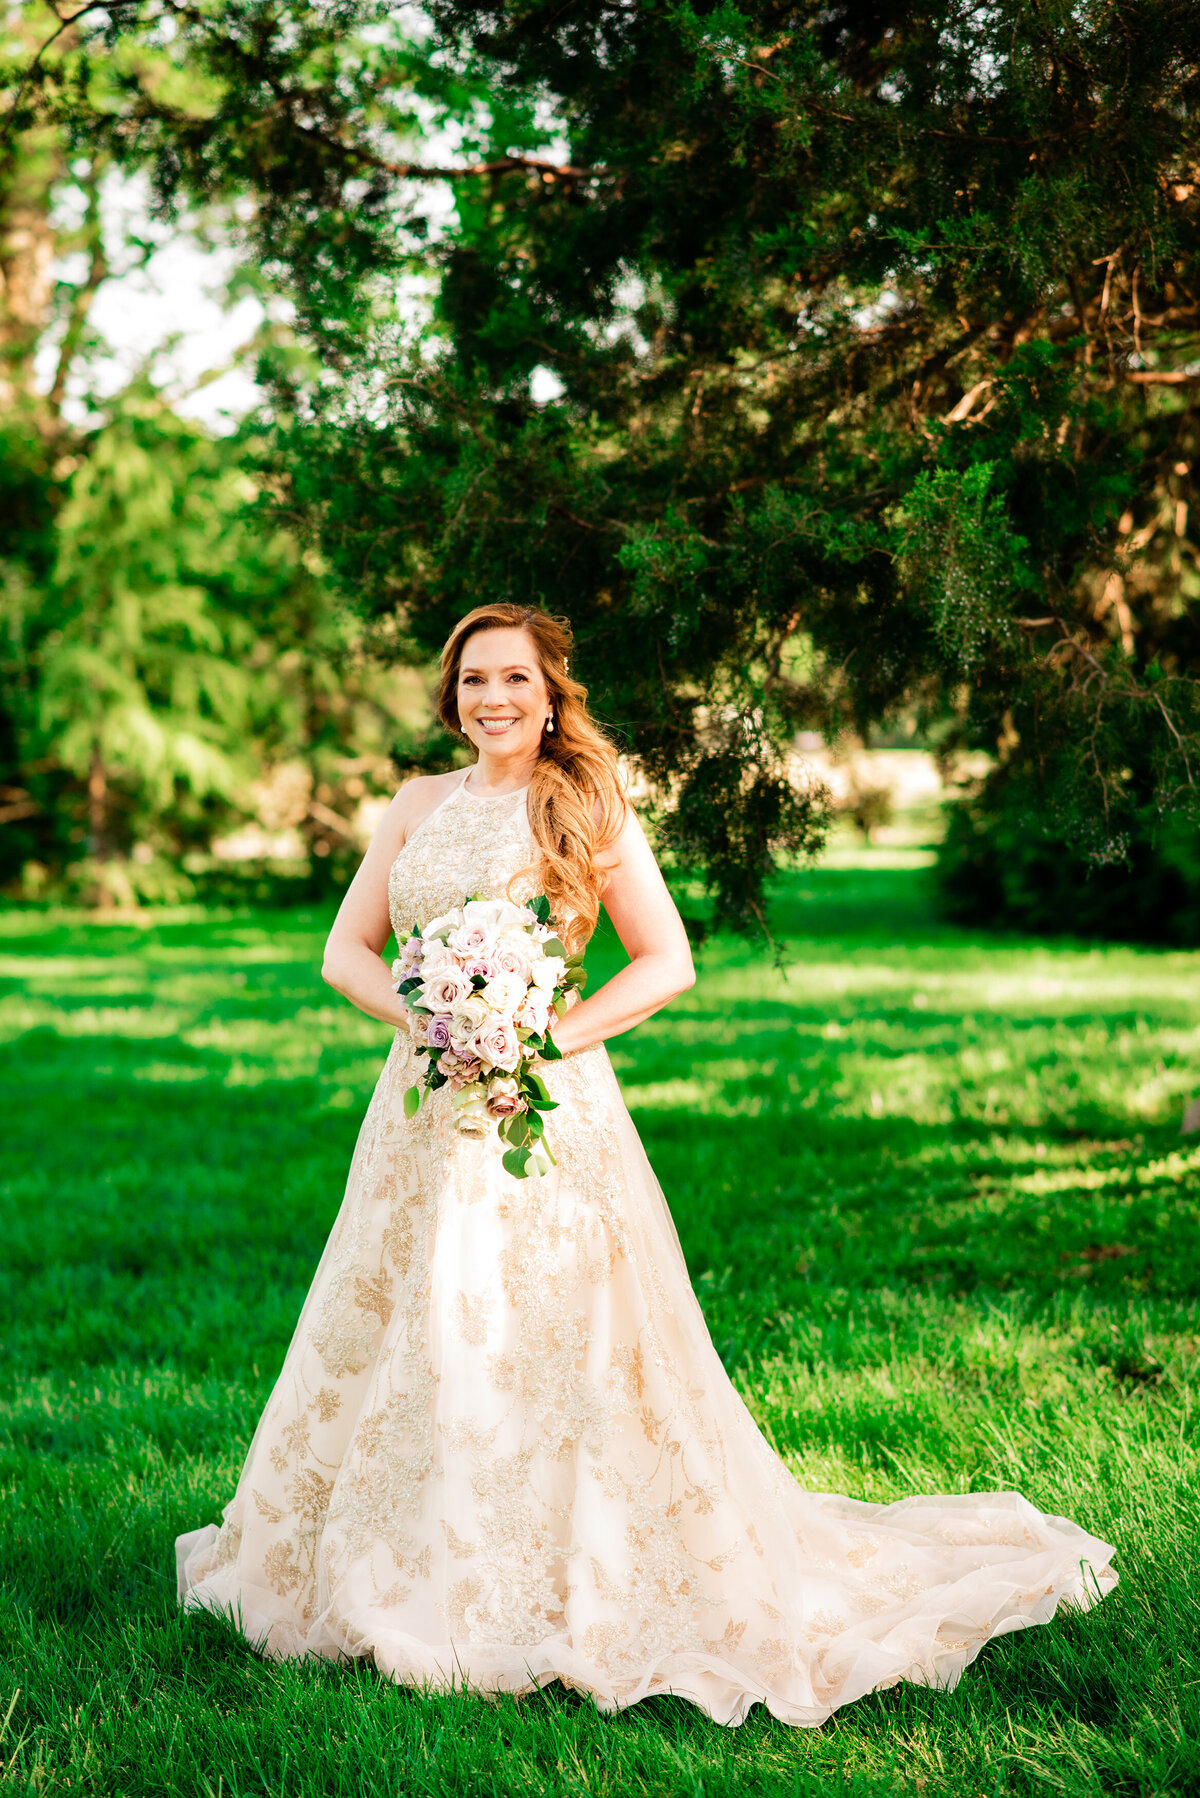 Bride wearing a golden colored wedding dress outside holding bouquet